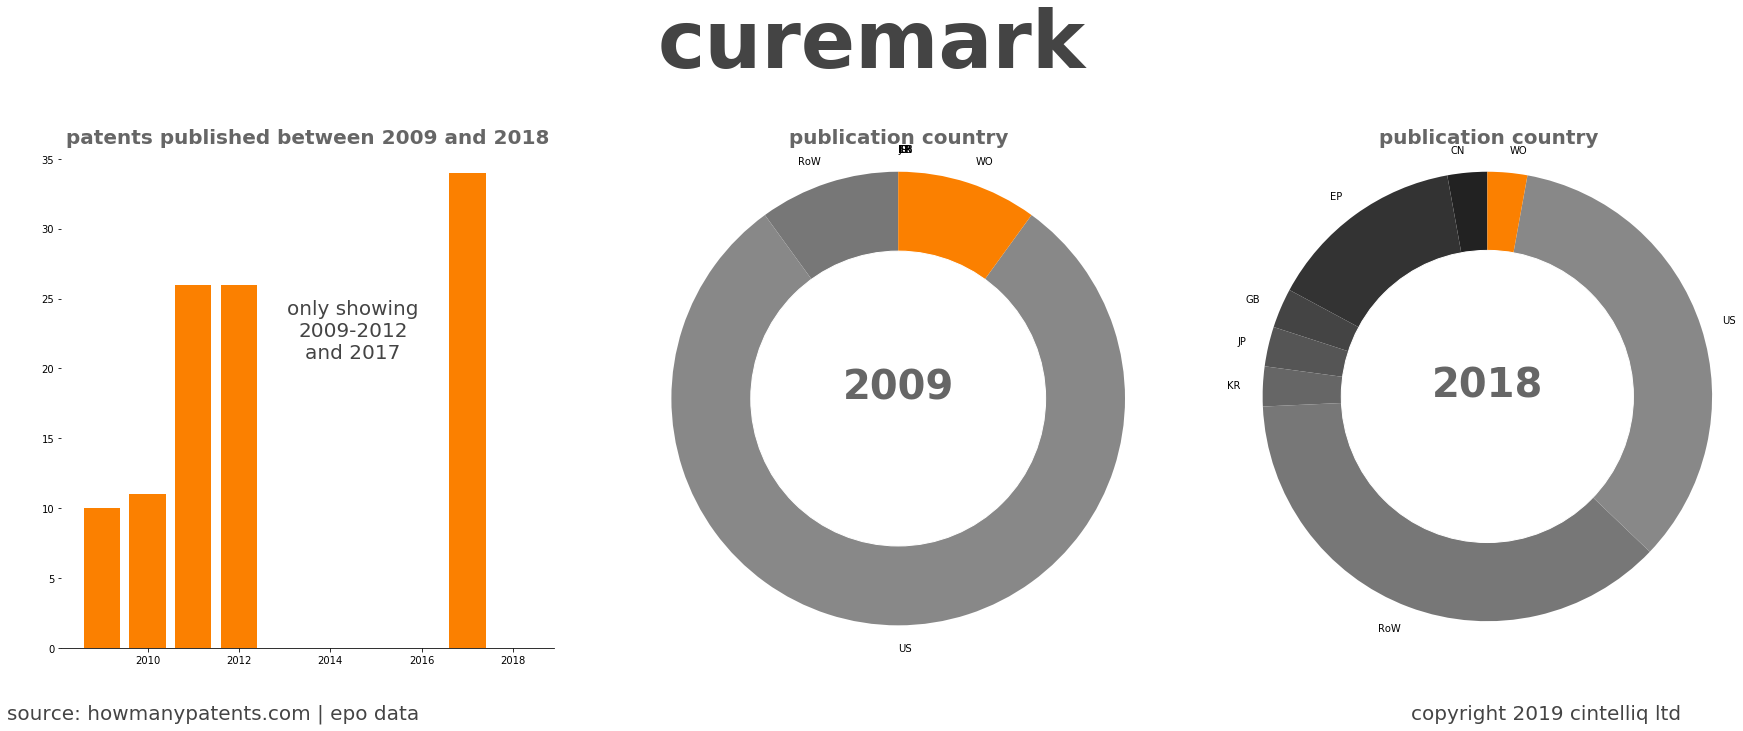 summary of patents for Curemark